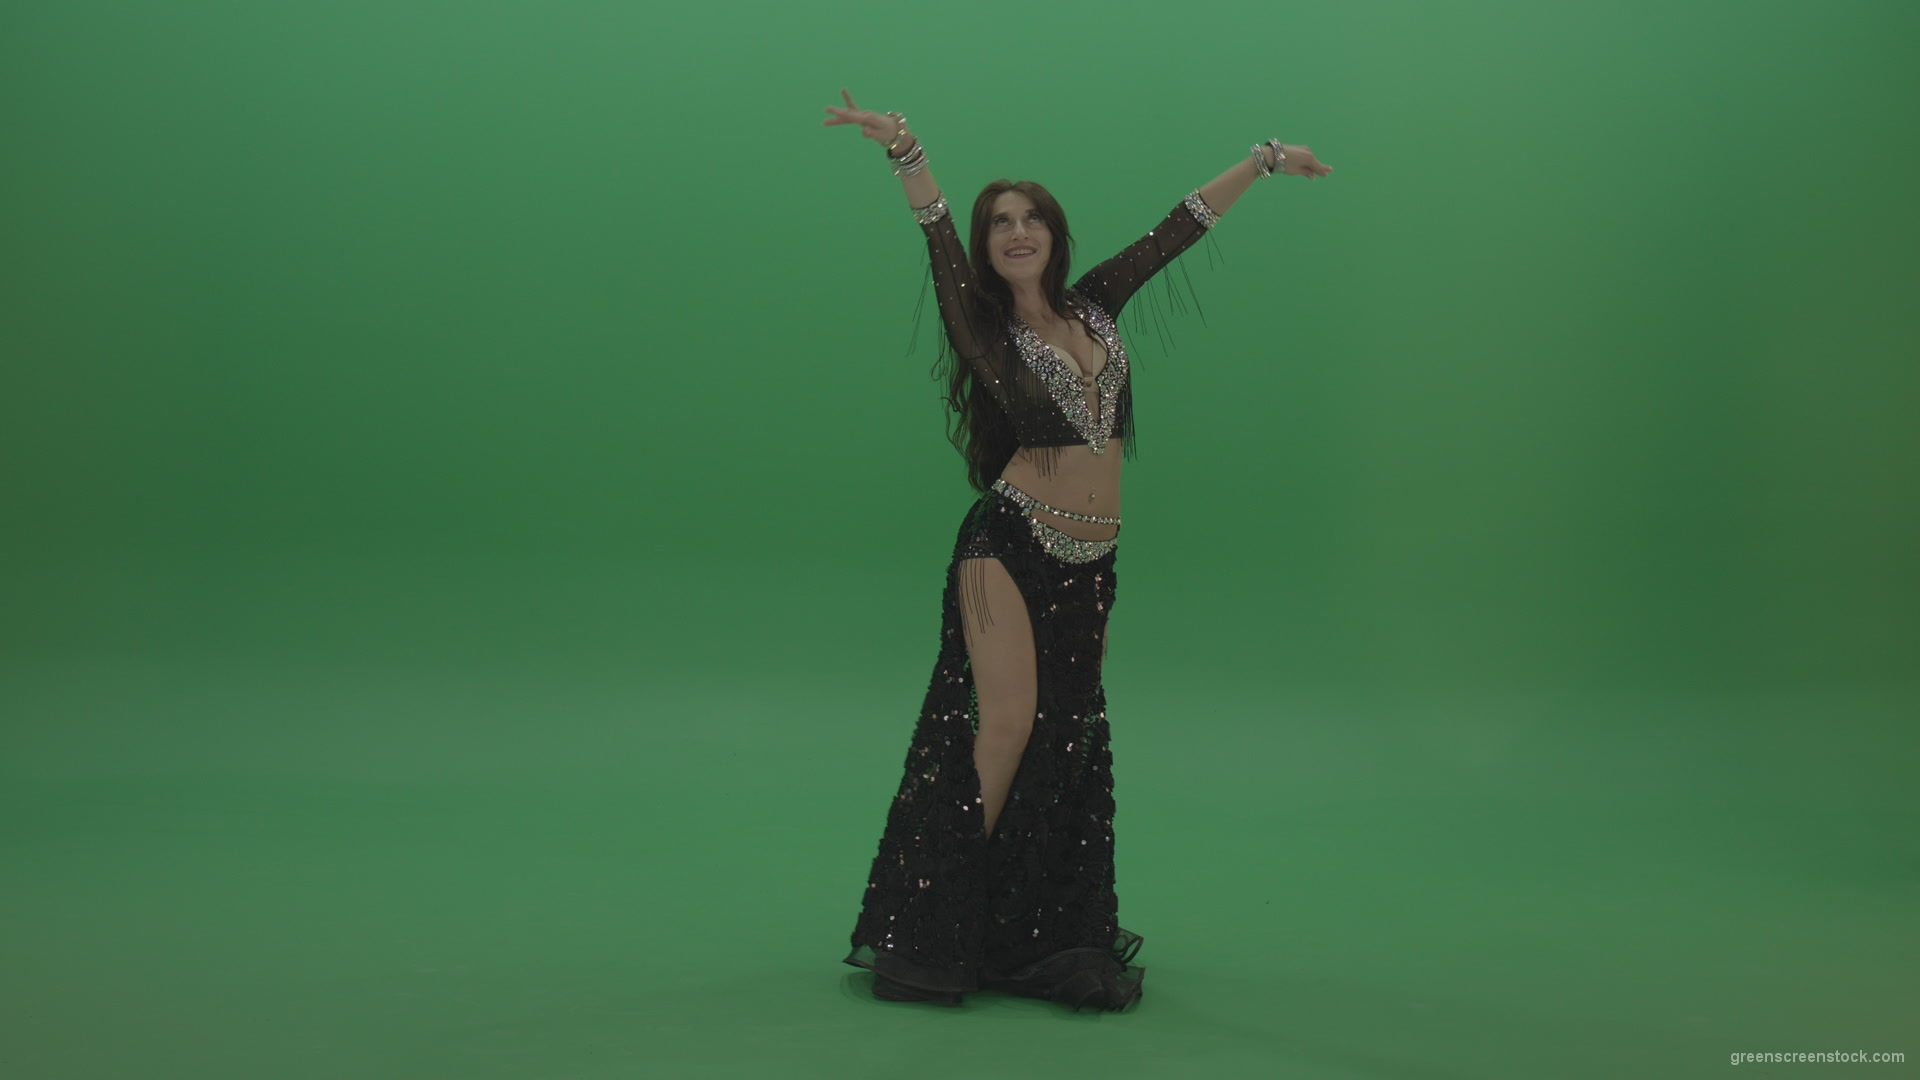 Admirable-belly-dancer-in-black-wear-display-amazing-dance-moves-over-chromakey-background_009 Green Screen Stock